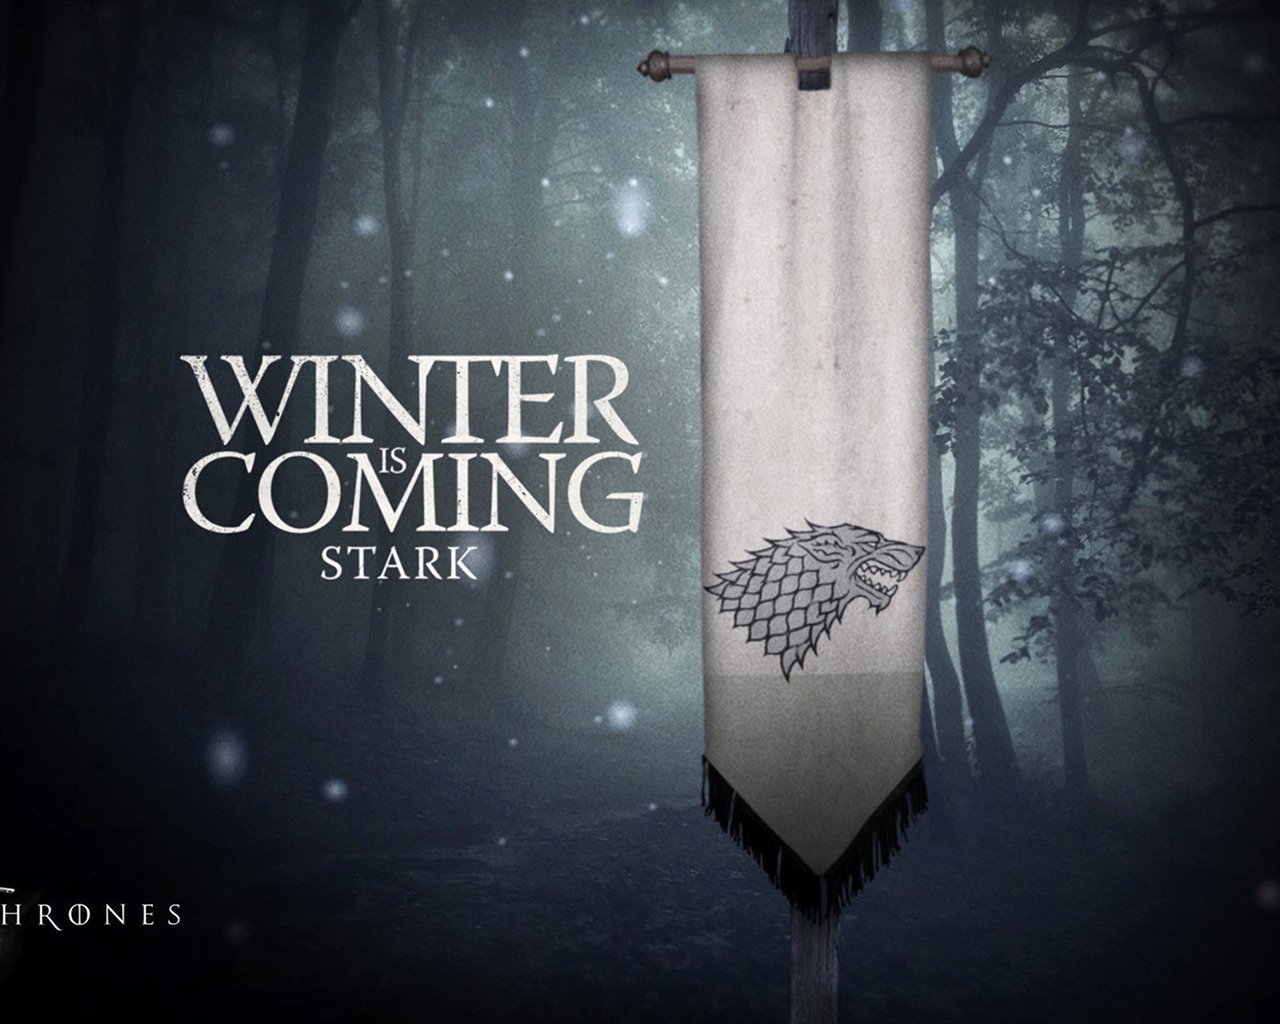 Winter is Coming Stark for 1280 x 1024 resolution